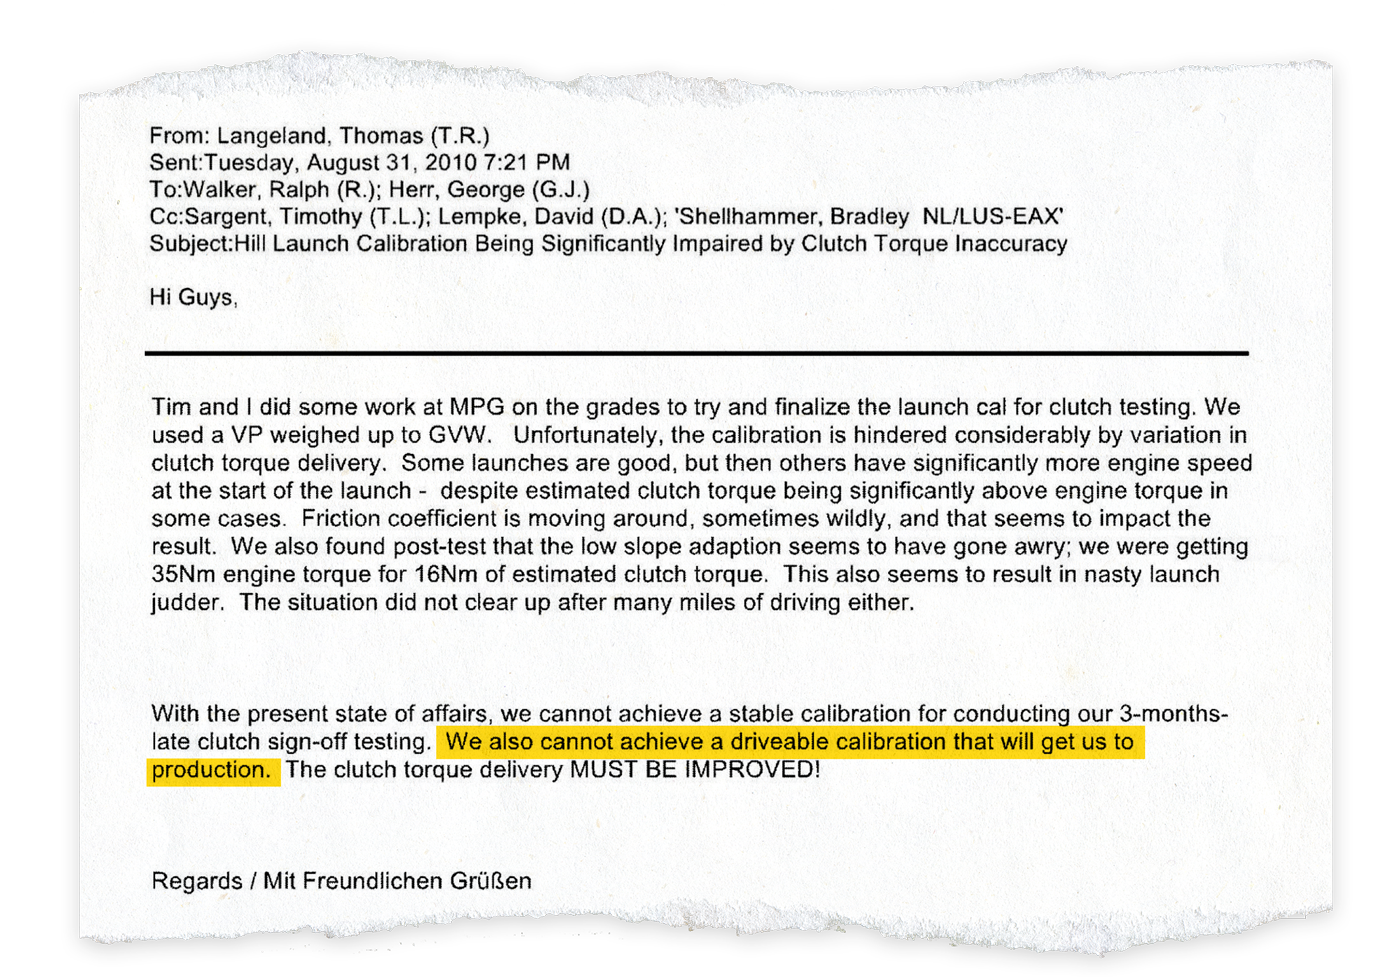 Six months before the 2012 Ford Focus went to dealers, veteran development engineer Tom Langeland emailed transmission calibration manager George Herr and others with his concerns about the DPS6 performance. (Highlighting added by Free Press)